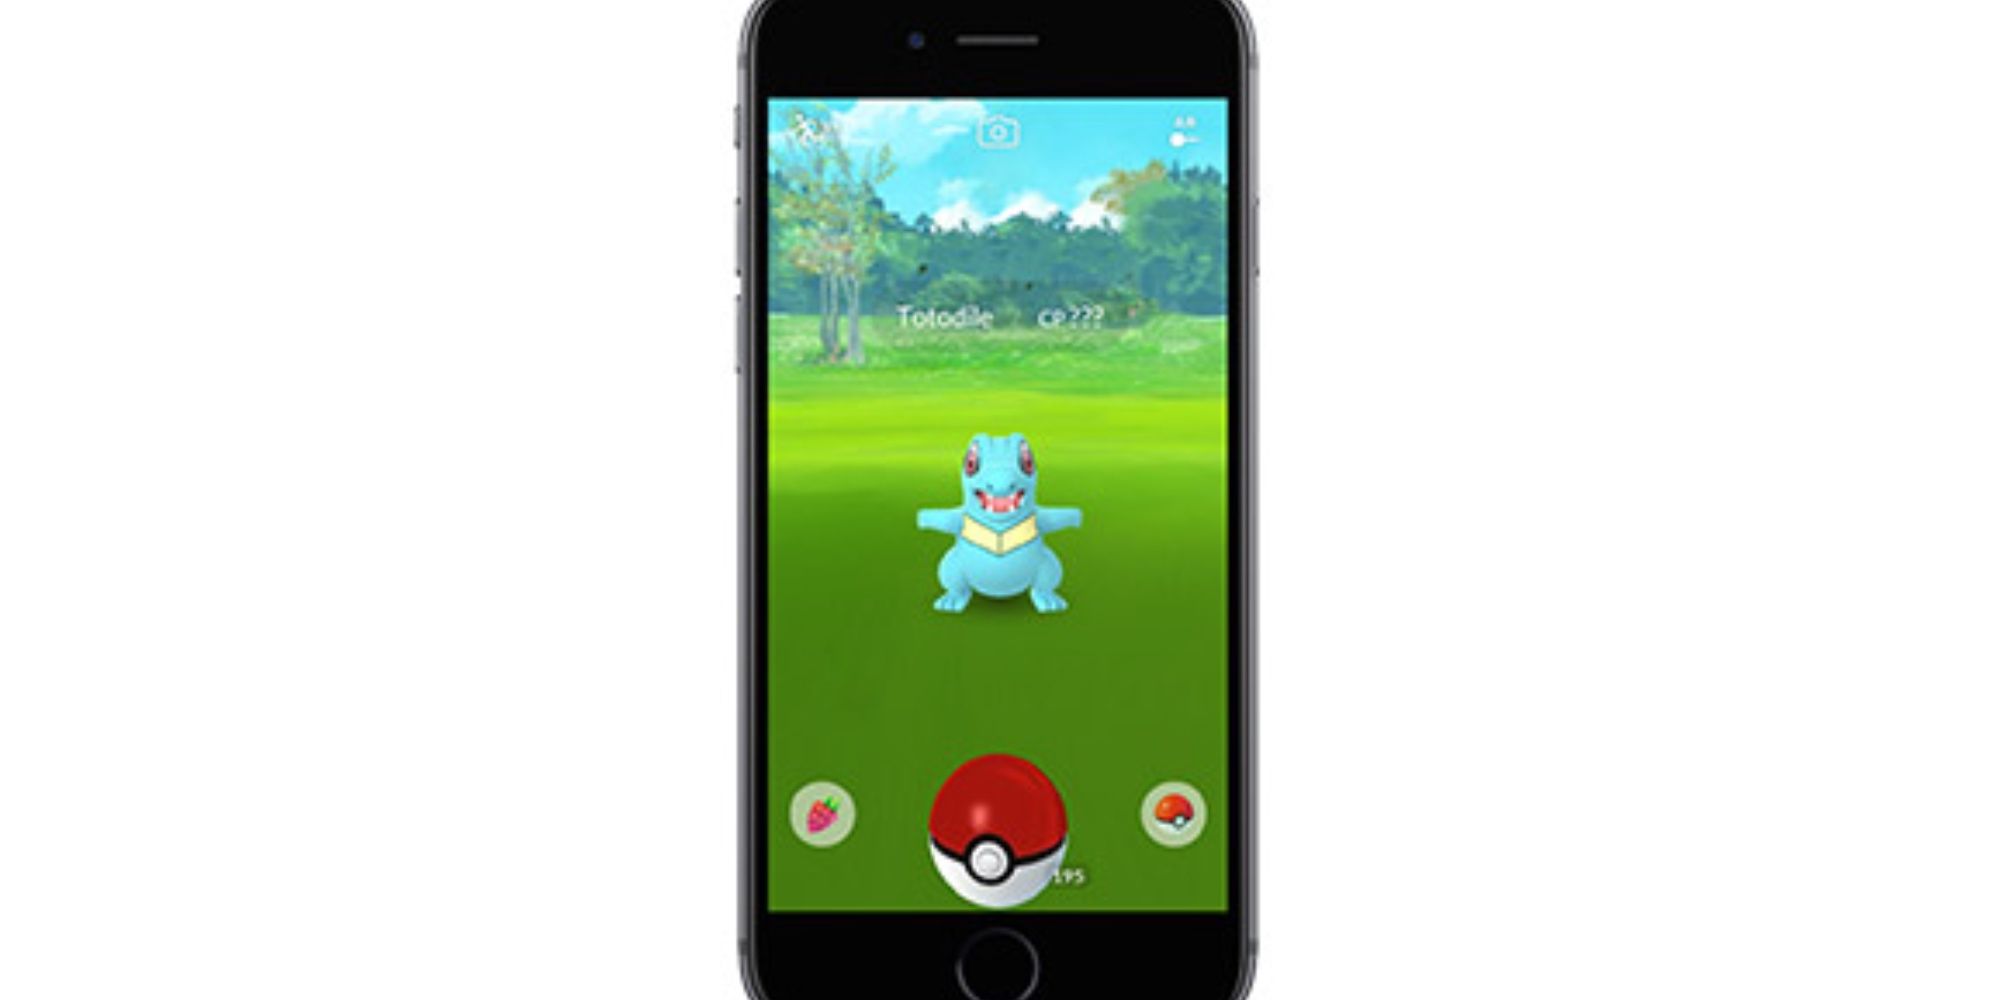 Player catches a Totodile using a Poke Ball